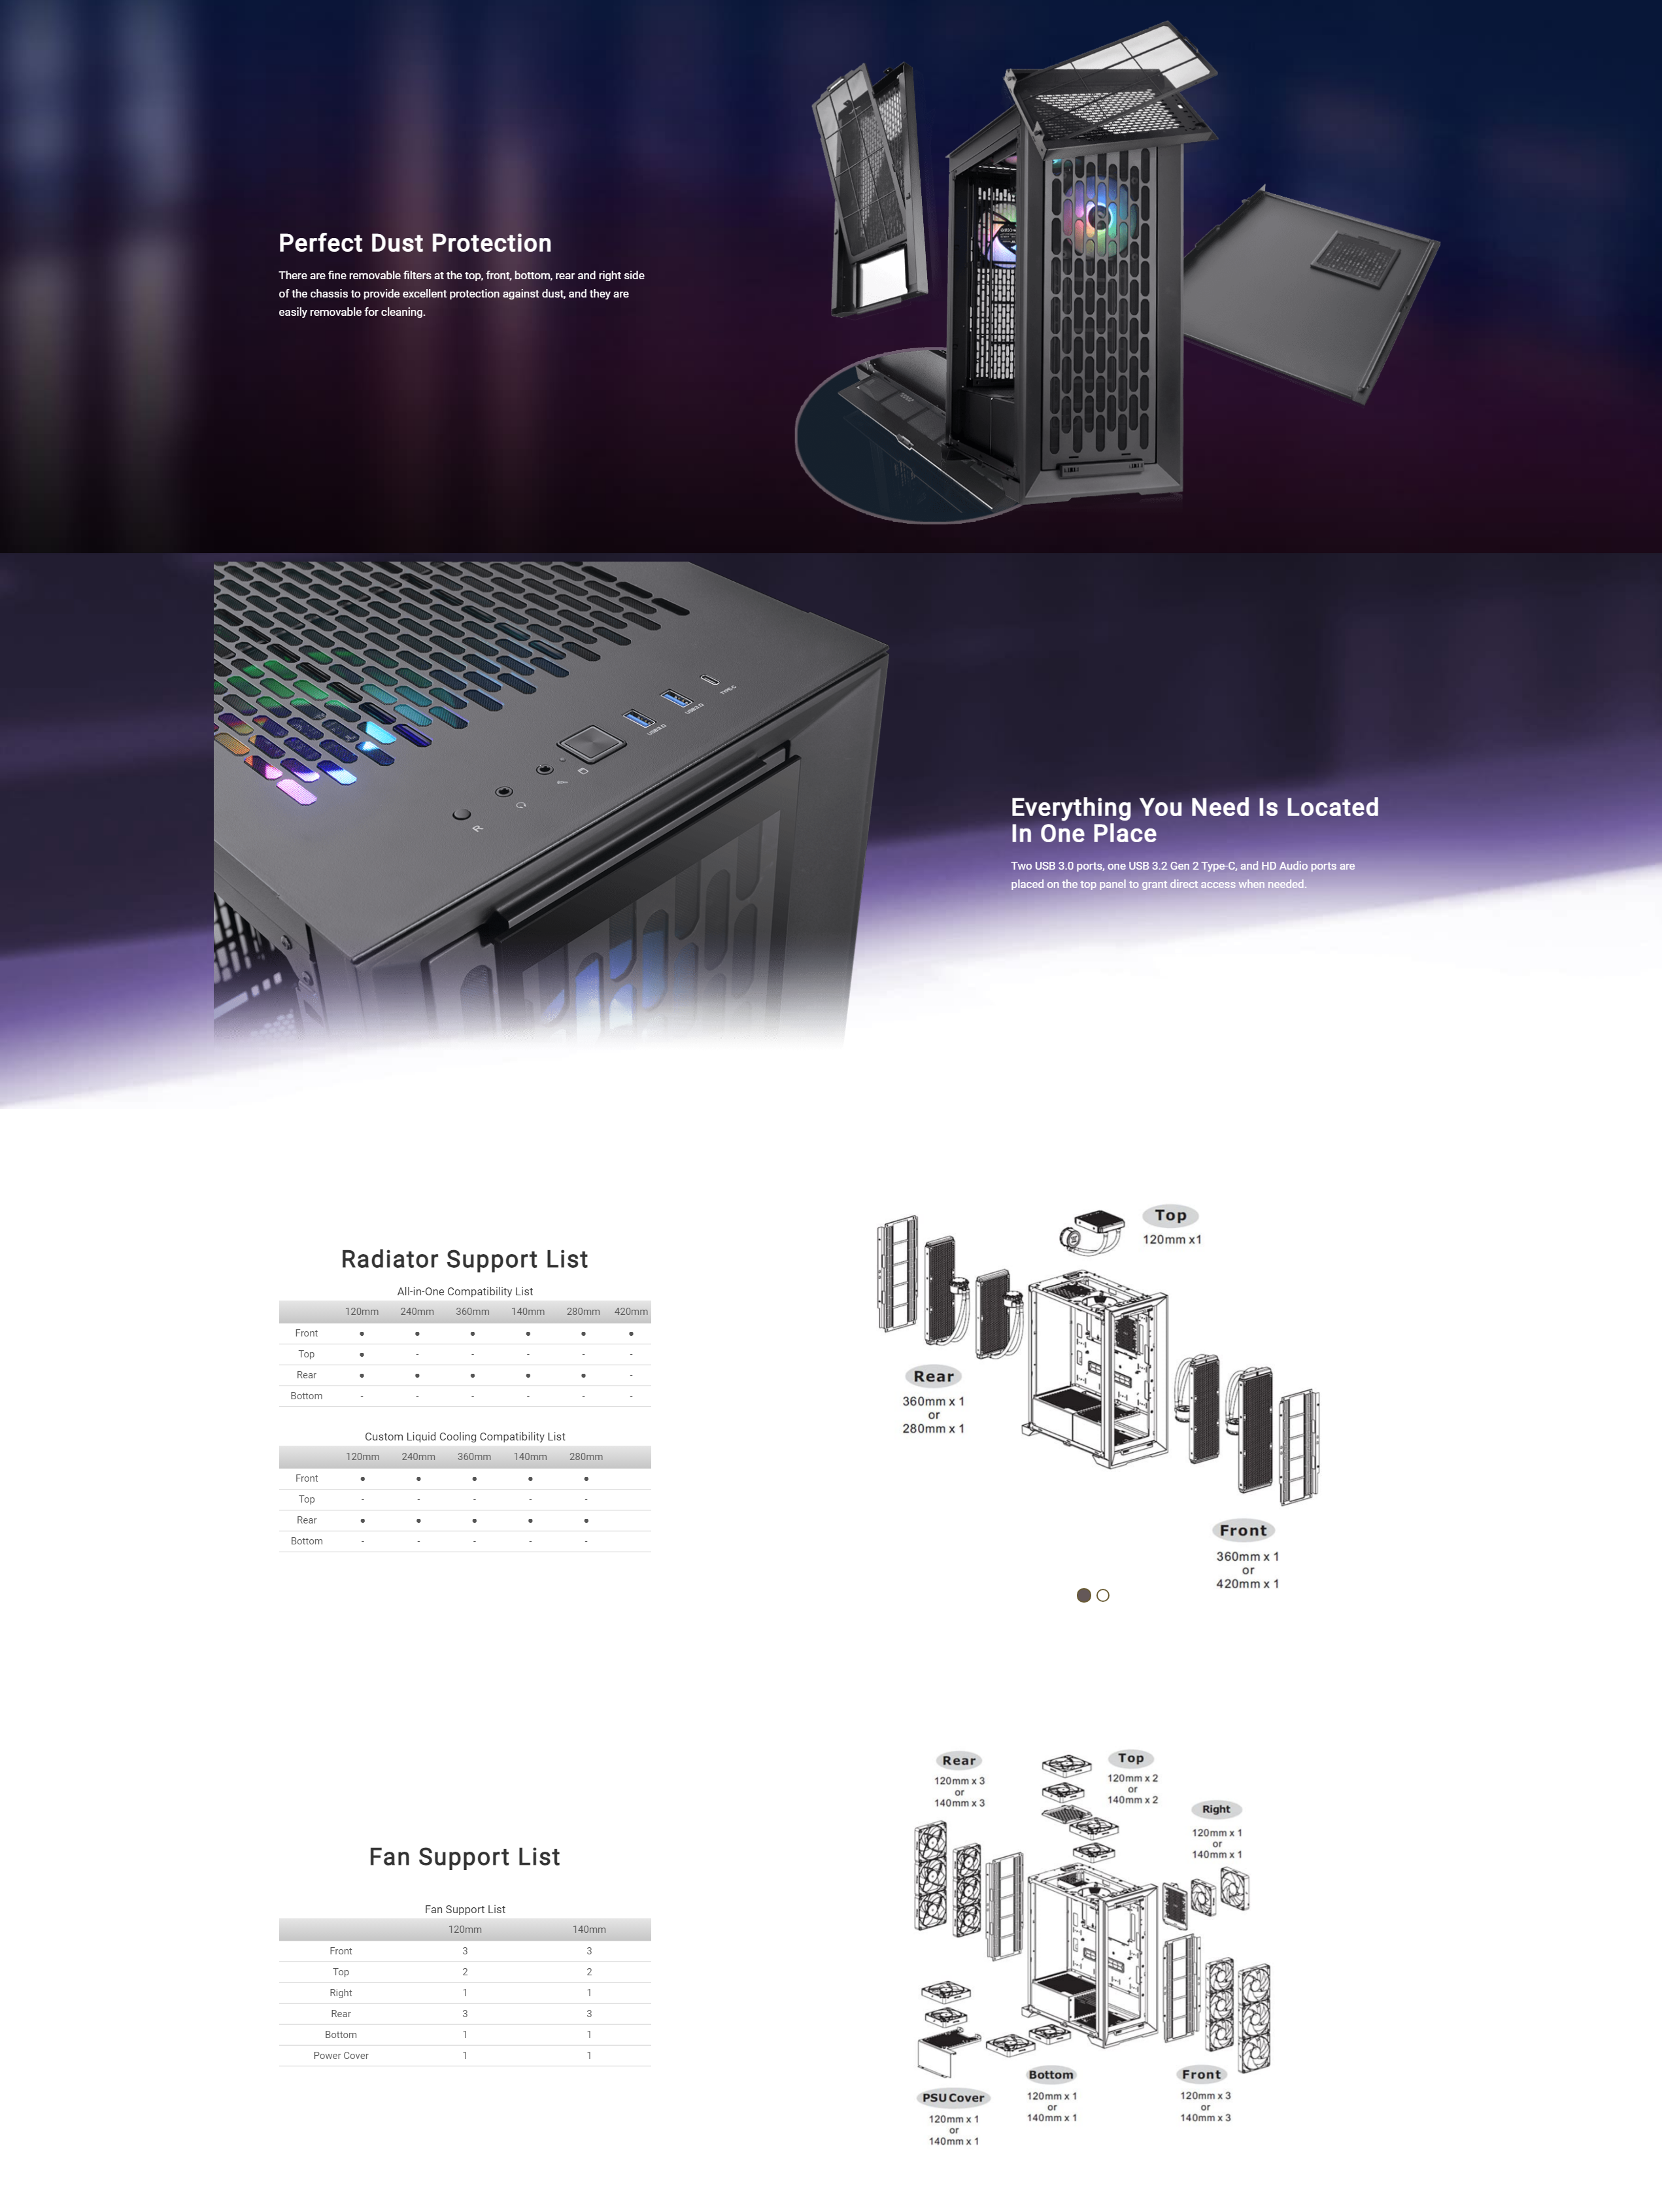 A large marketing image providing additional information about the product Thermaltake CTE T500 - ARGB Full Tower Case (Black) - Additional alt info not provided